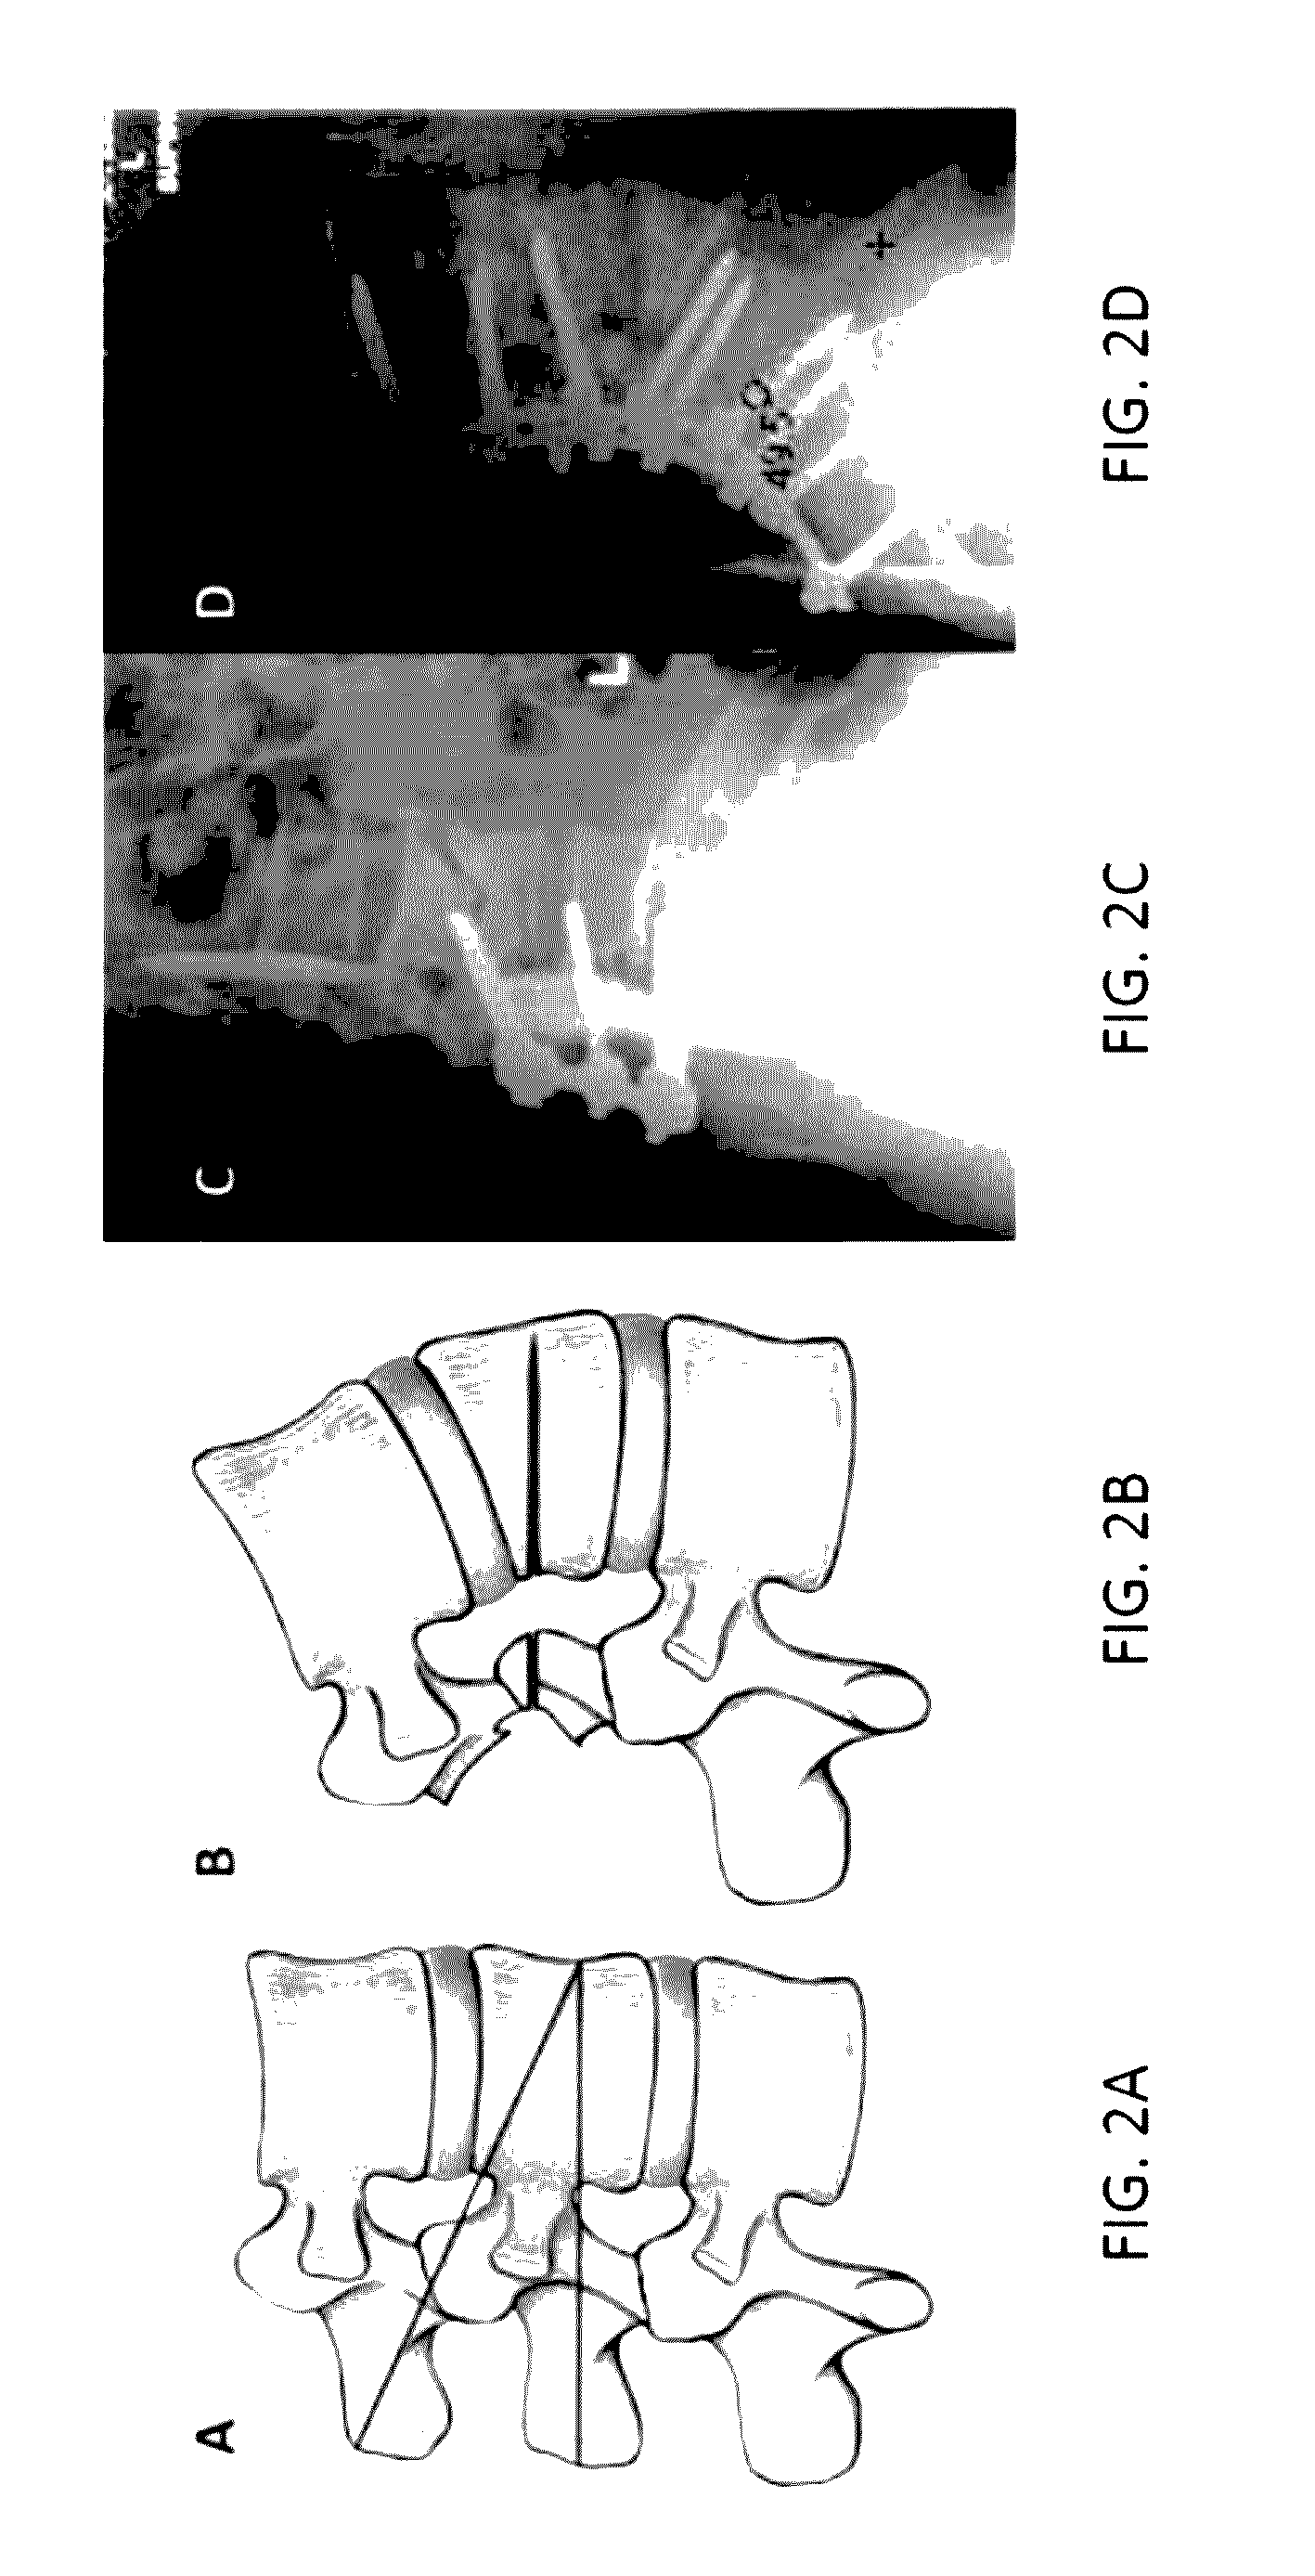 Robotic surgical systems and methods